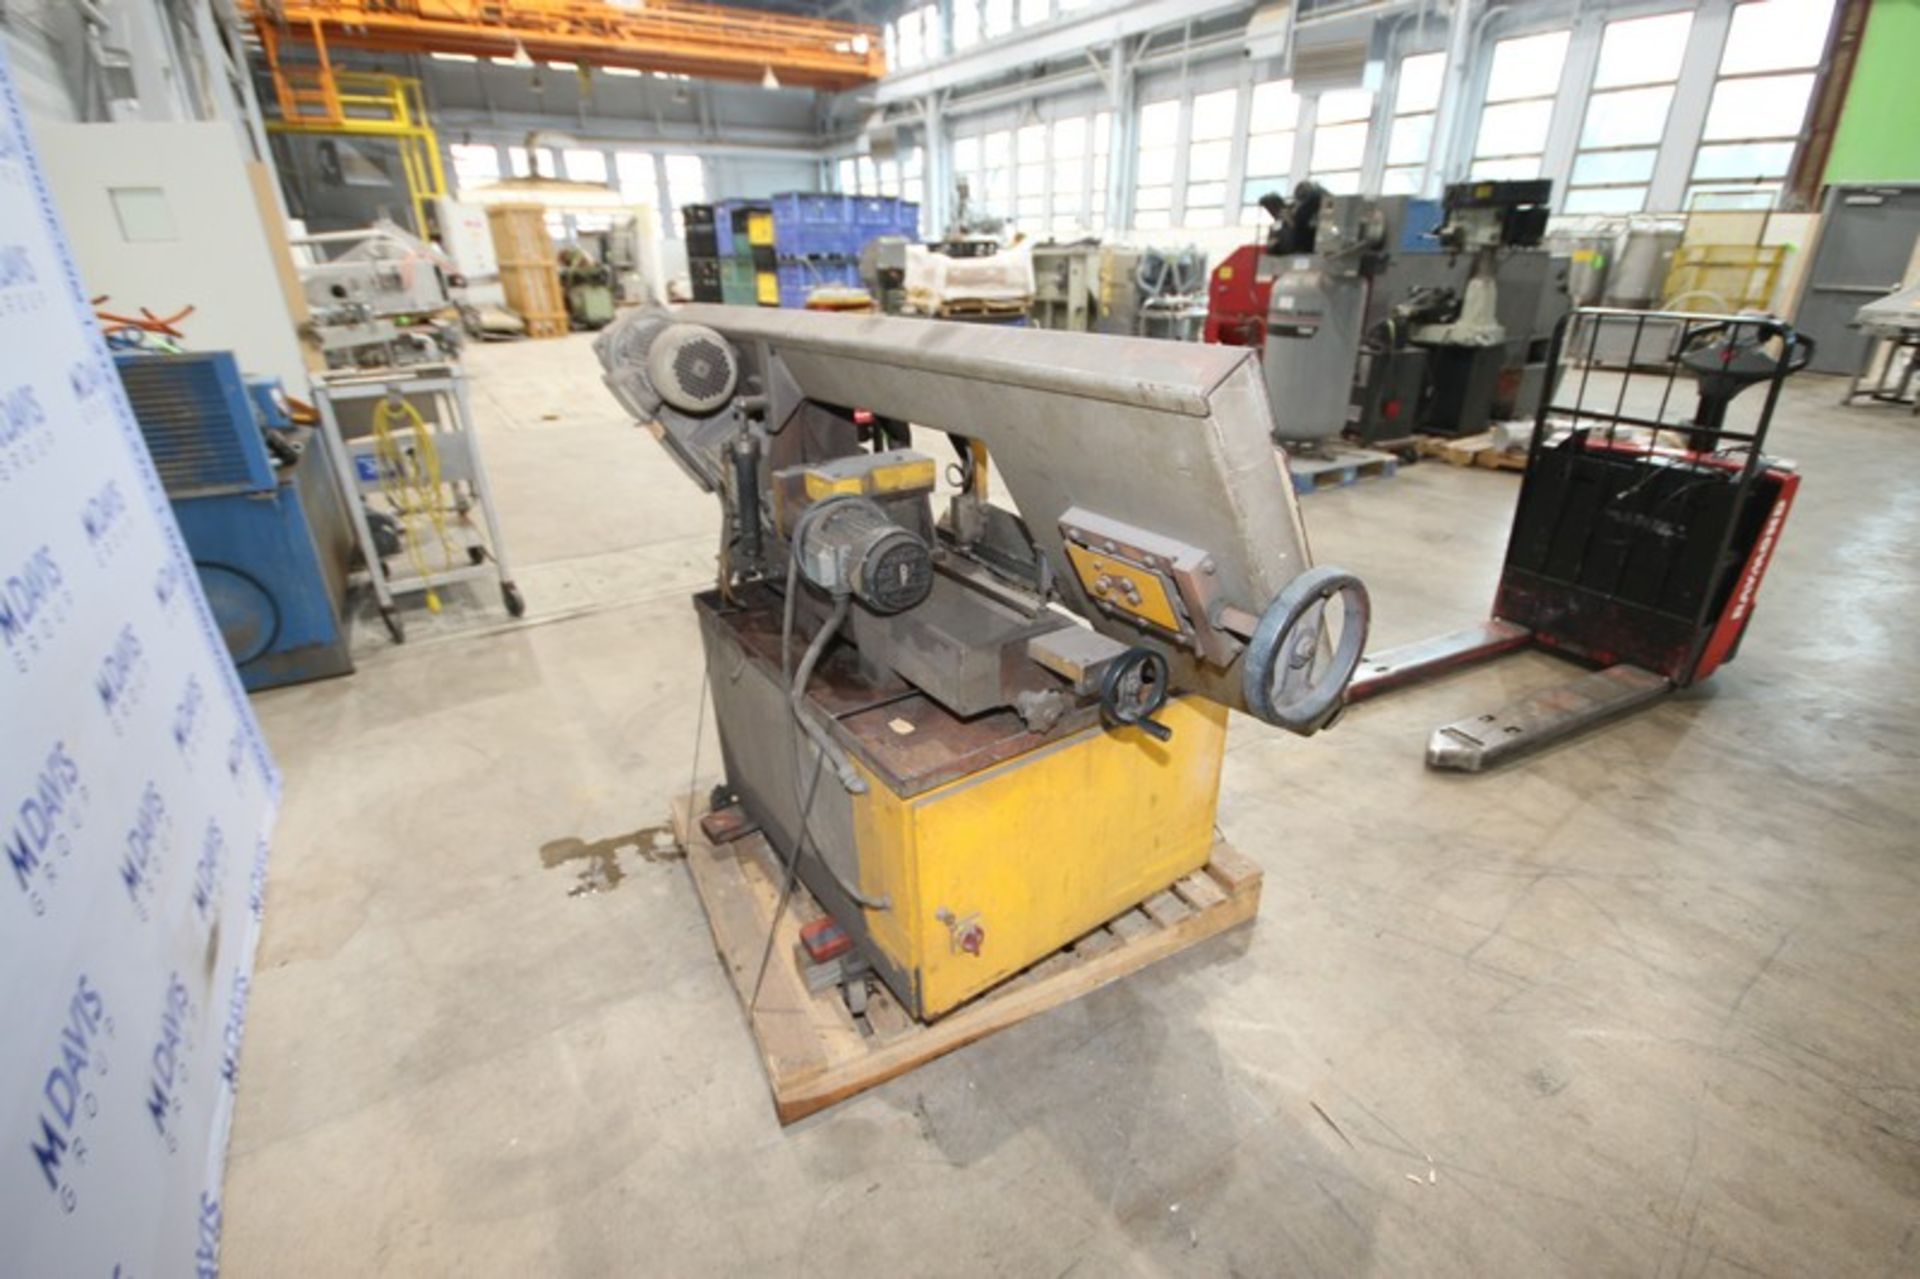 Startrite Horizontal Band Saw,M/N HB280A, S/N 151622, 208/240 Volts, 3 Phase, Mounted on Portable - Image 7 of 8